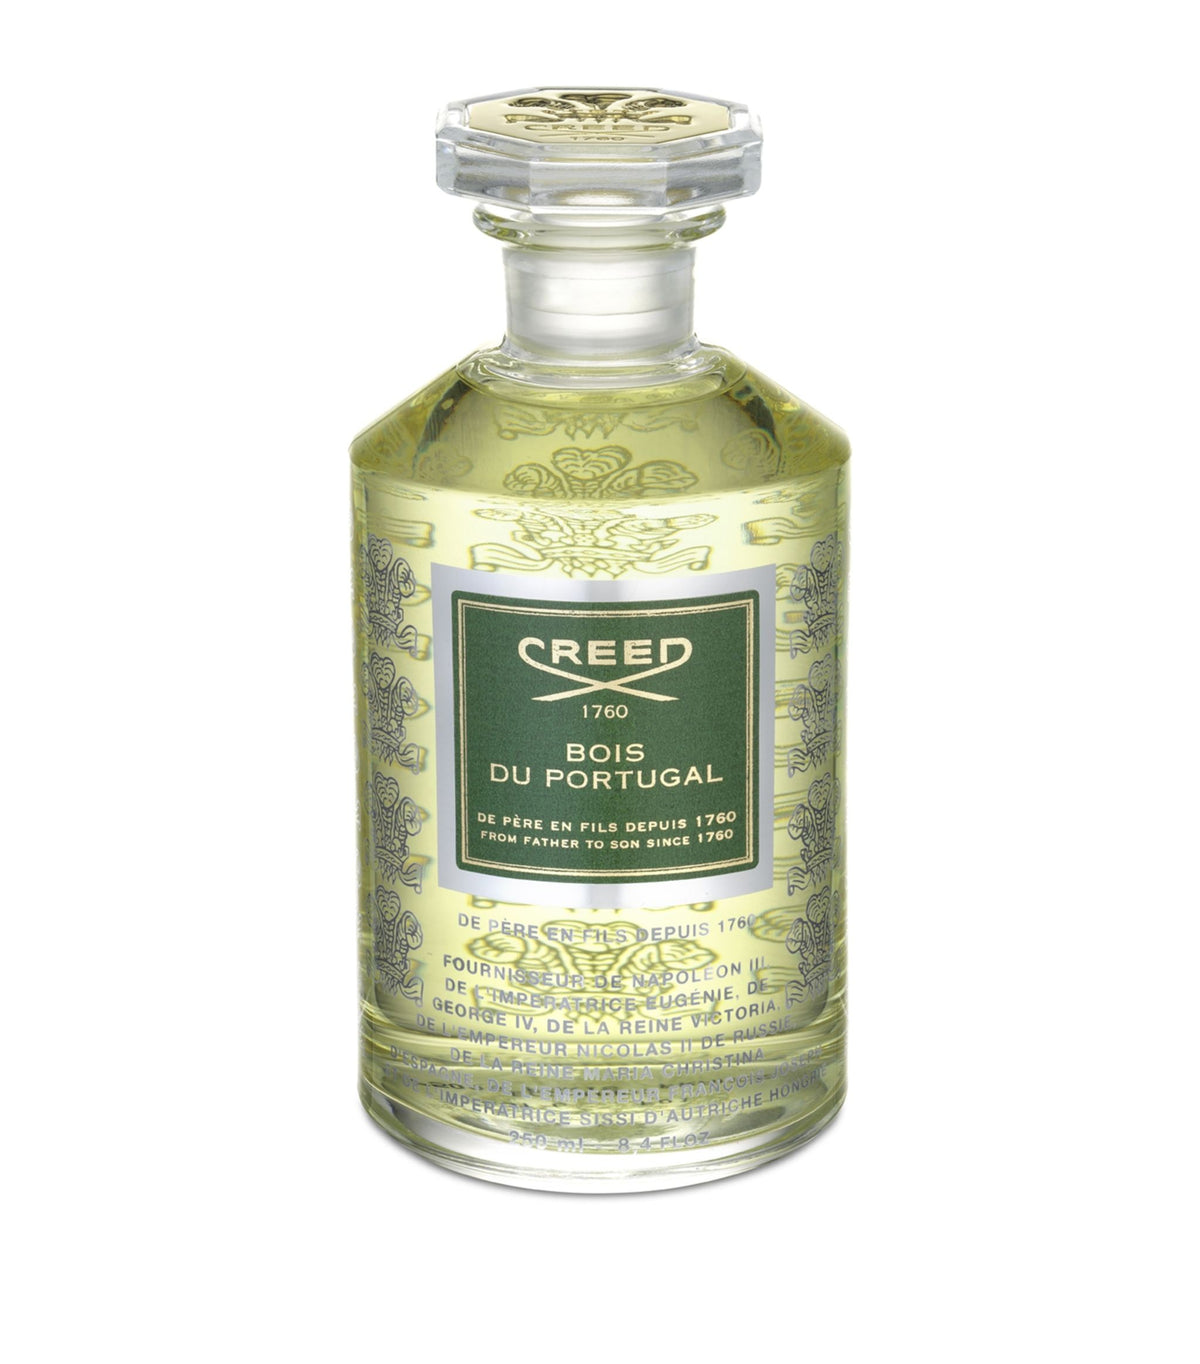 Creed wood from Portugal 250ml